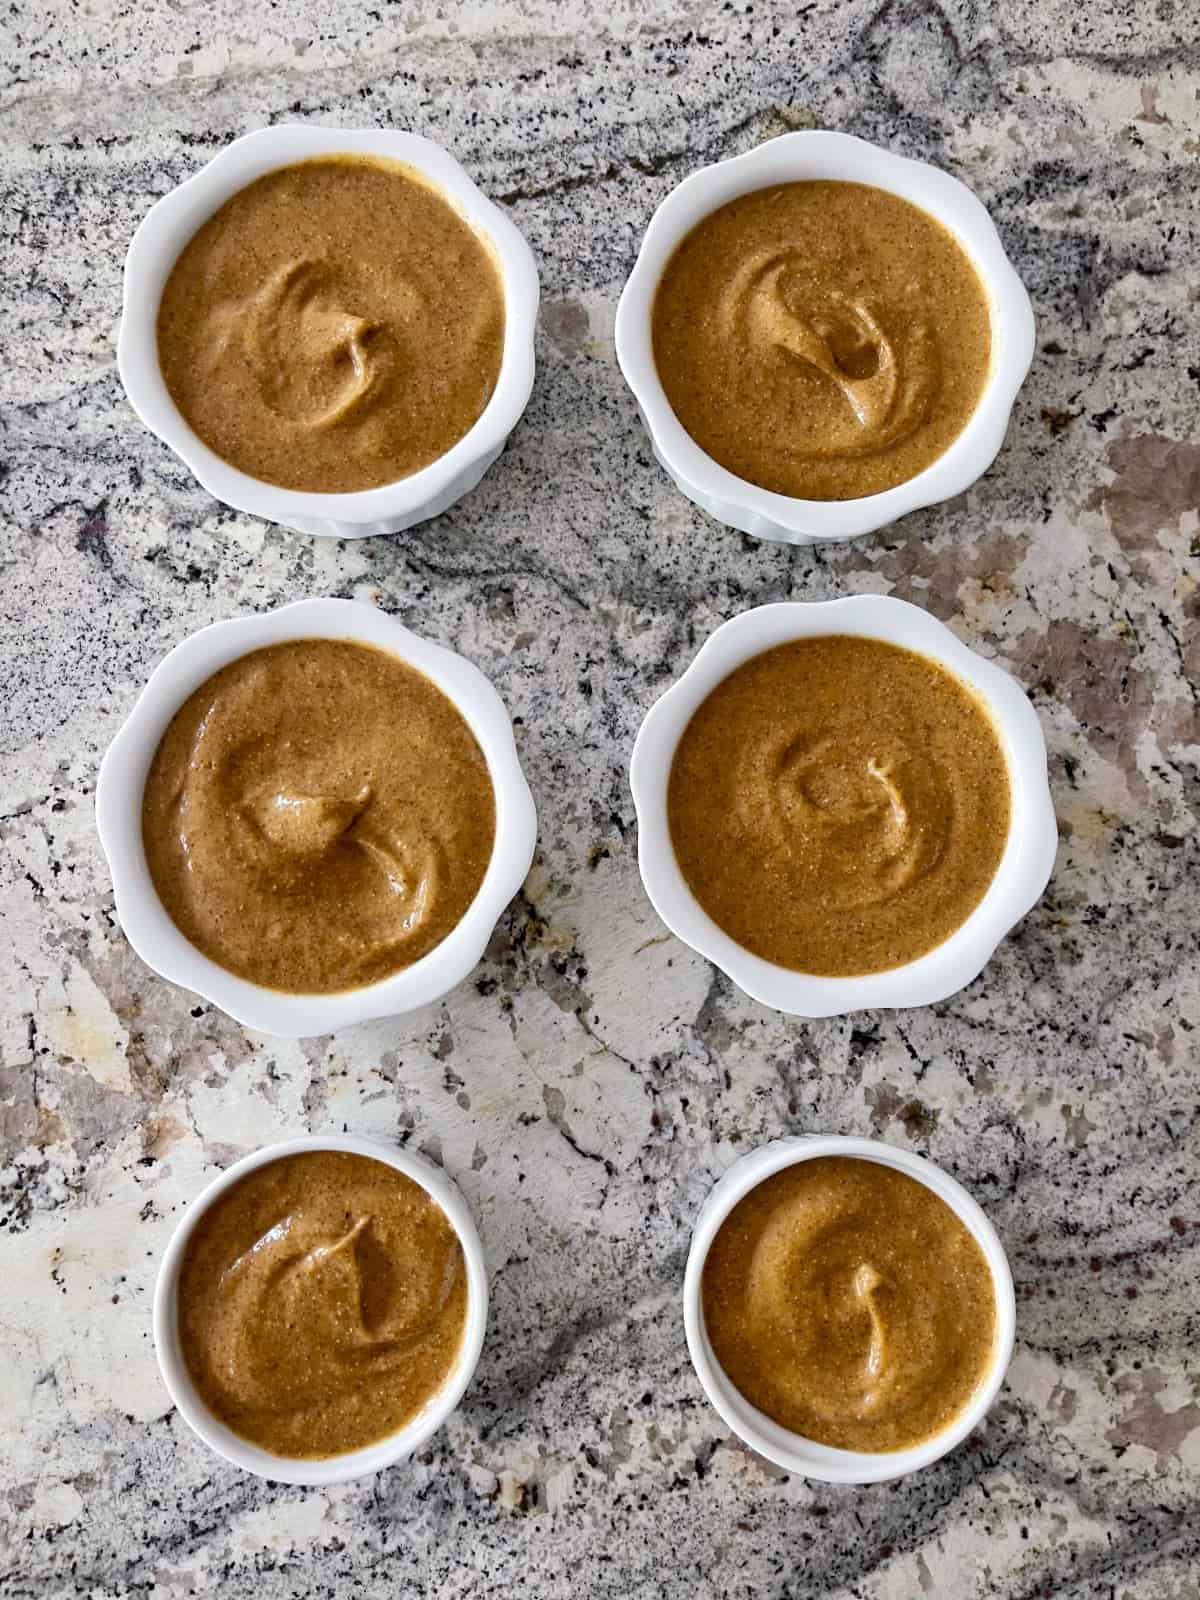 Pumpkin pie chia pudding in six small white ramekins on granite counter from above.